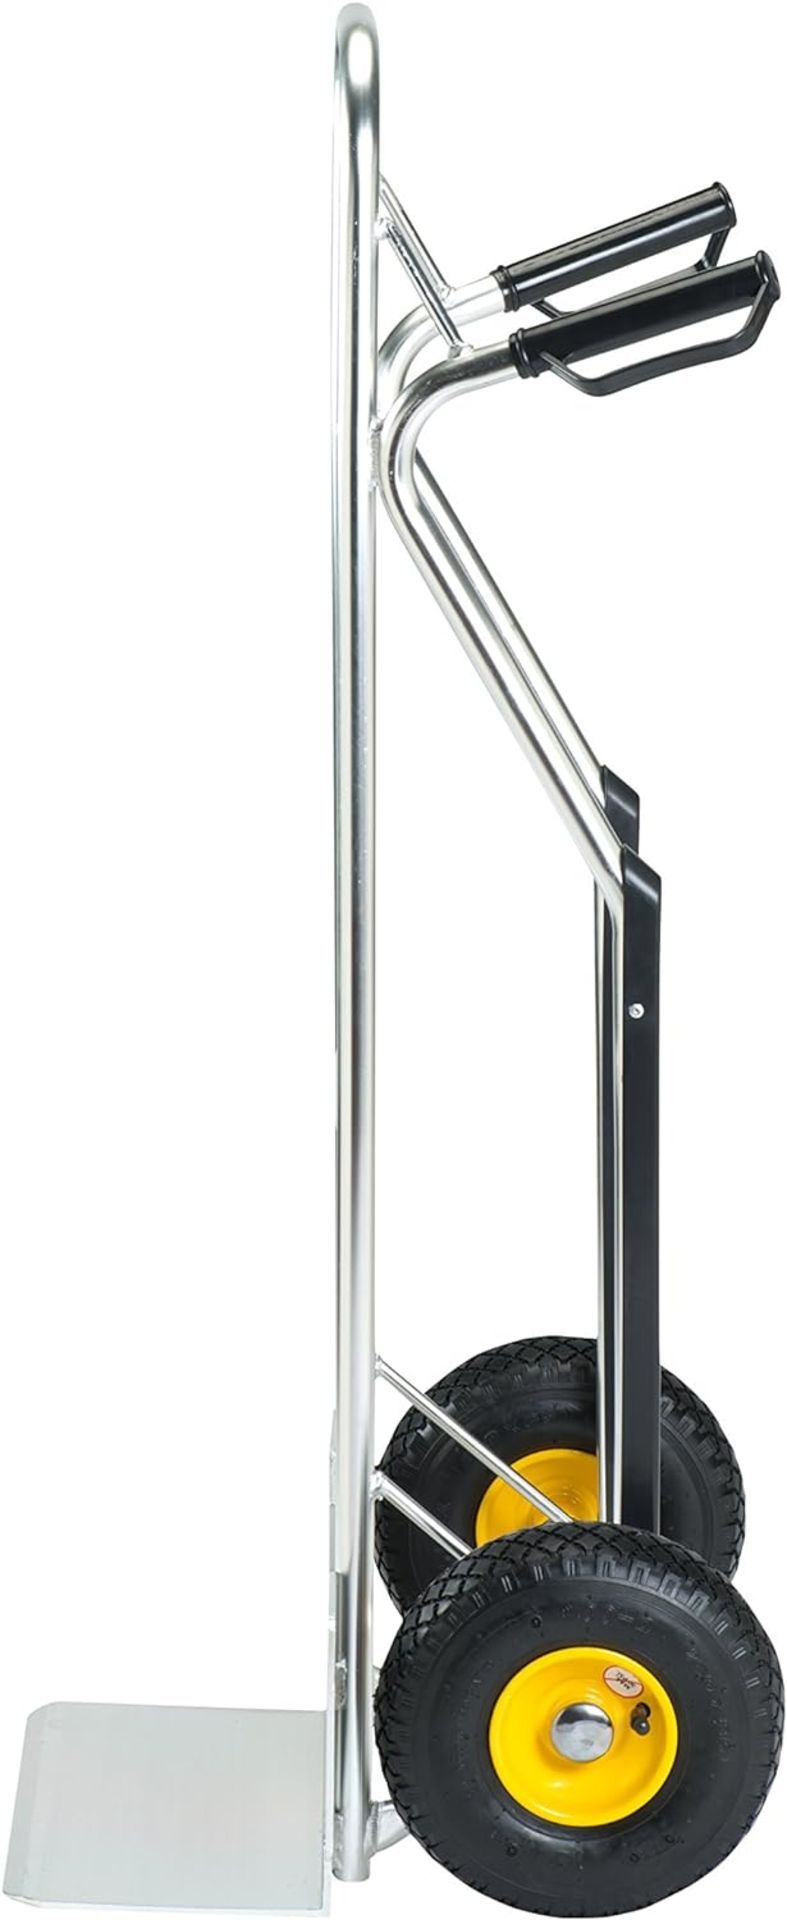 Stanley Aluminium Hand Truck-200KG, Silver, SXWTC-HT525, Large pneumatic wheels allow for easy - Image 3 of 5